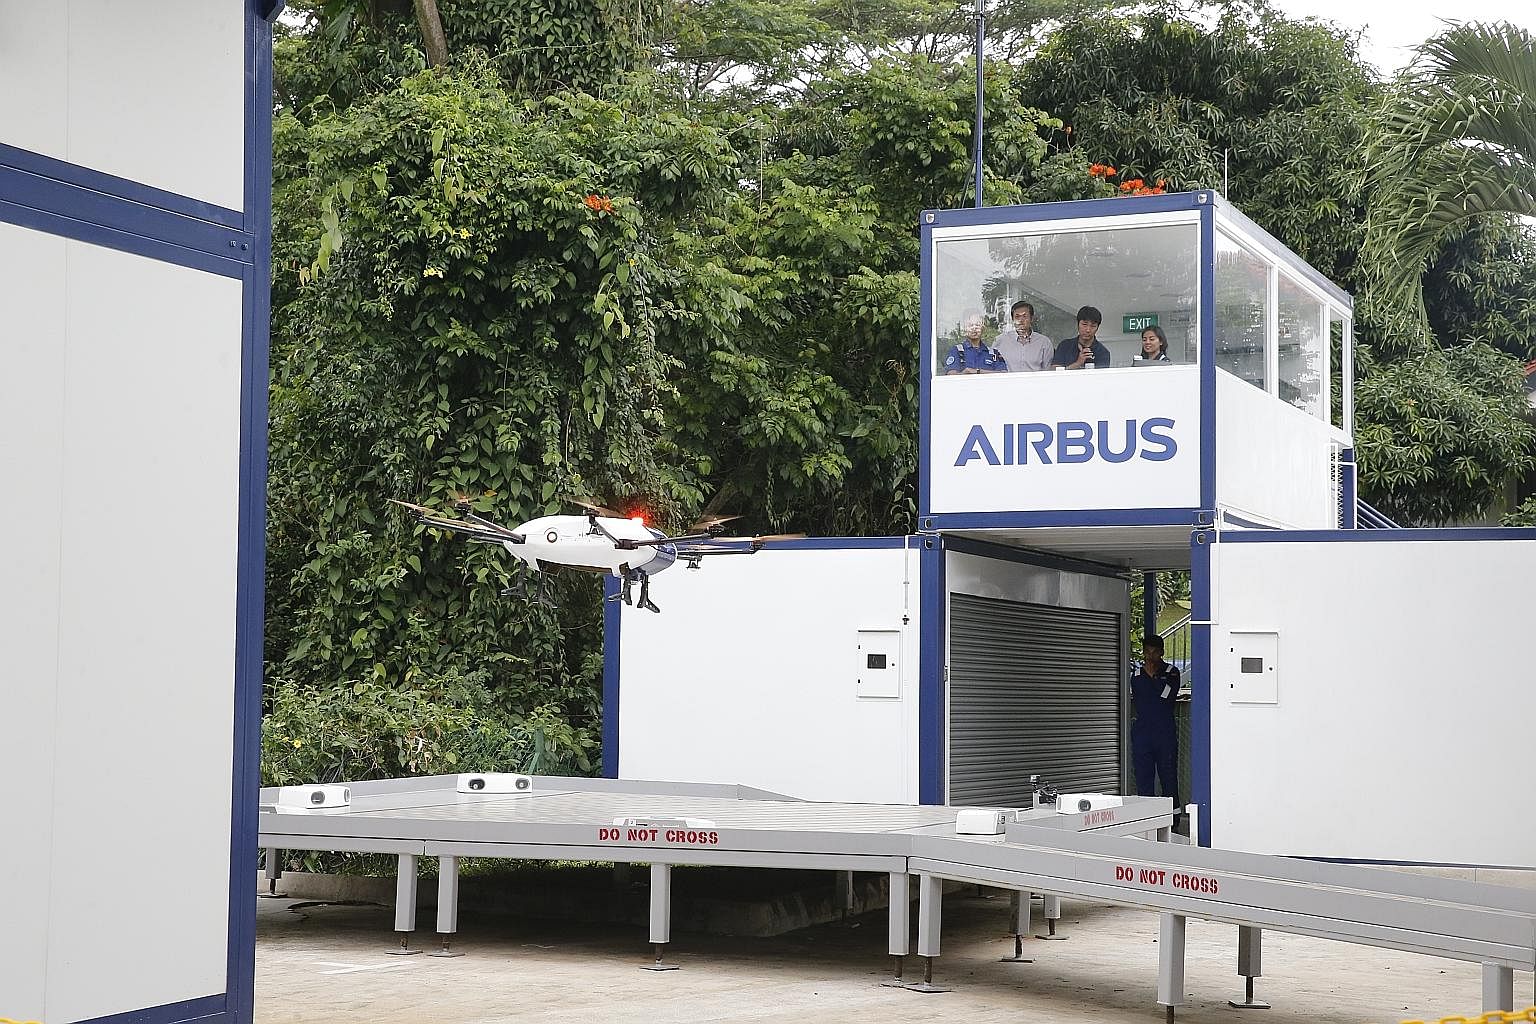 Airbus Helicopters' Skyways unmanned air vehicle completed its first flight demonstration at the National University of Singapore in February last year. (From left) Thales Singapore CEO Kevin Chow, Minister for Trade and Industry Chan Chun Sing, Thal